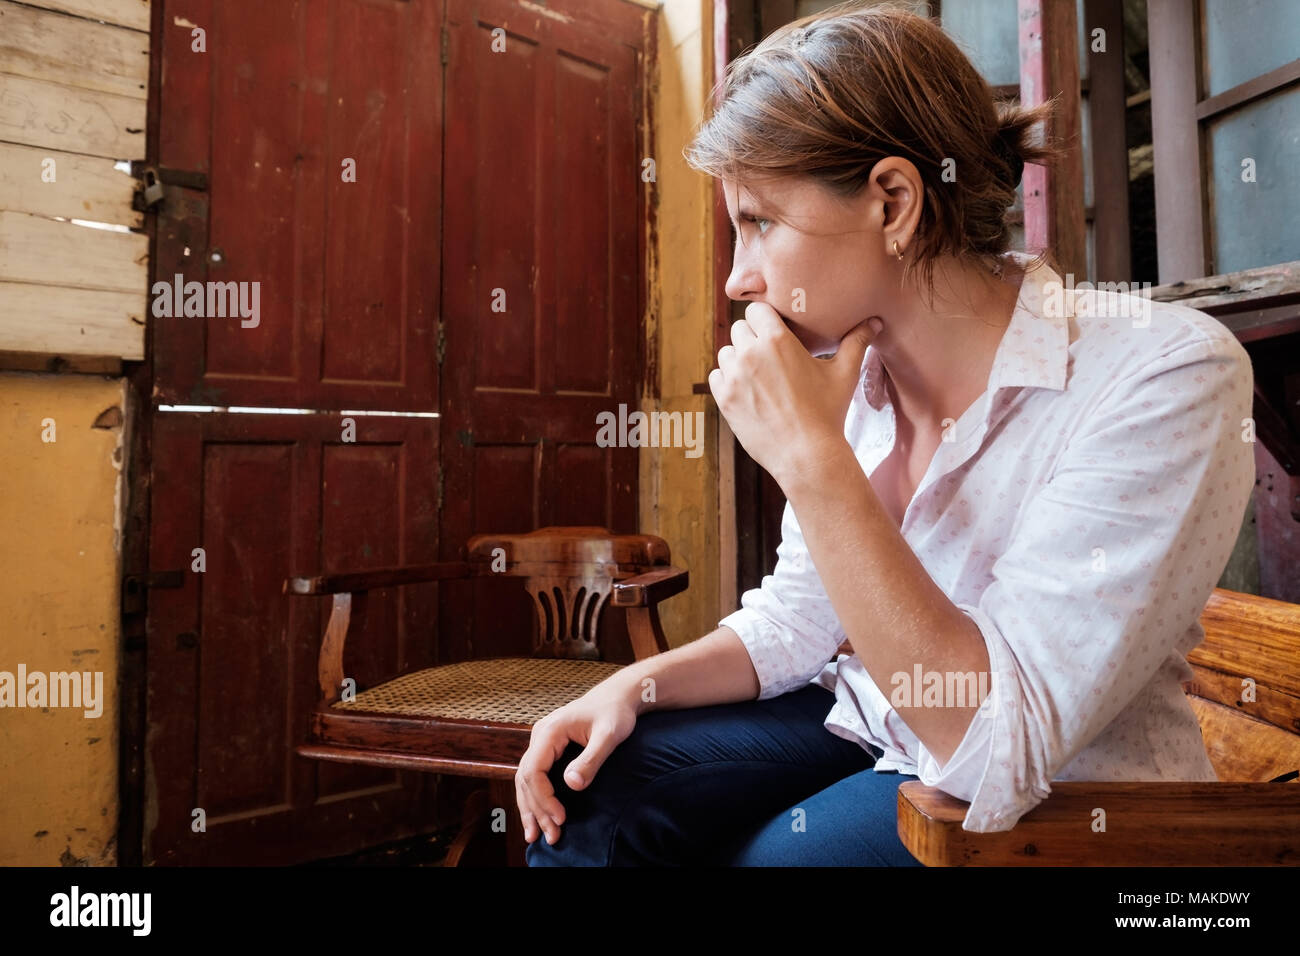 Profile of caucasian young woman sitting in strange place with shabby old walls and thinking Stock Photo